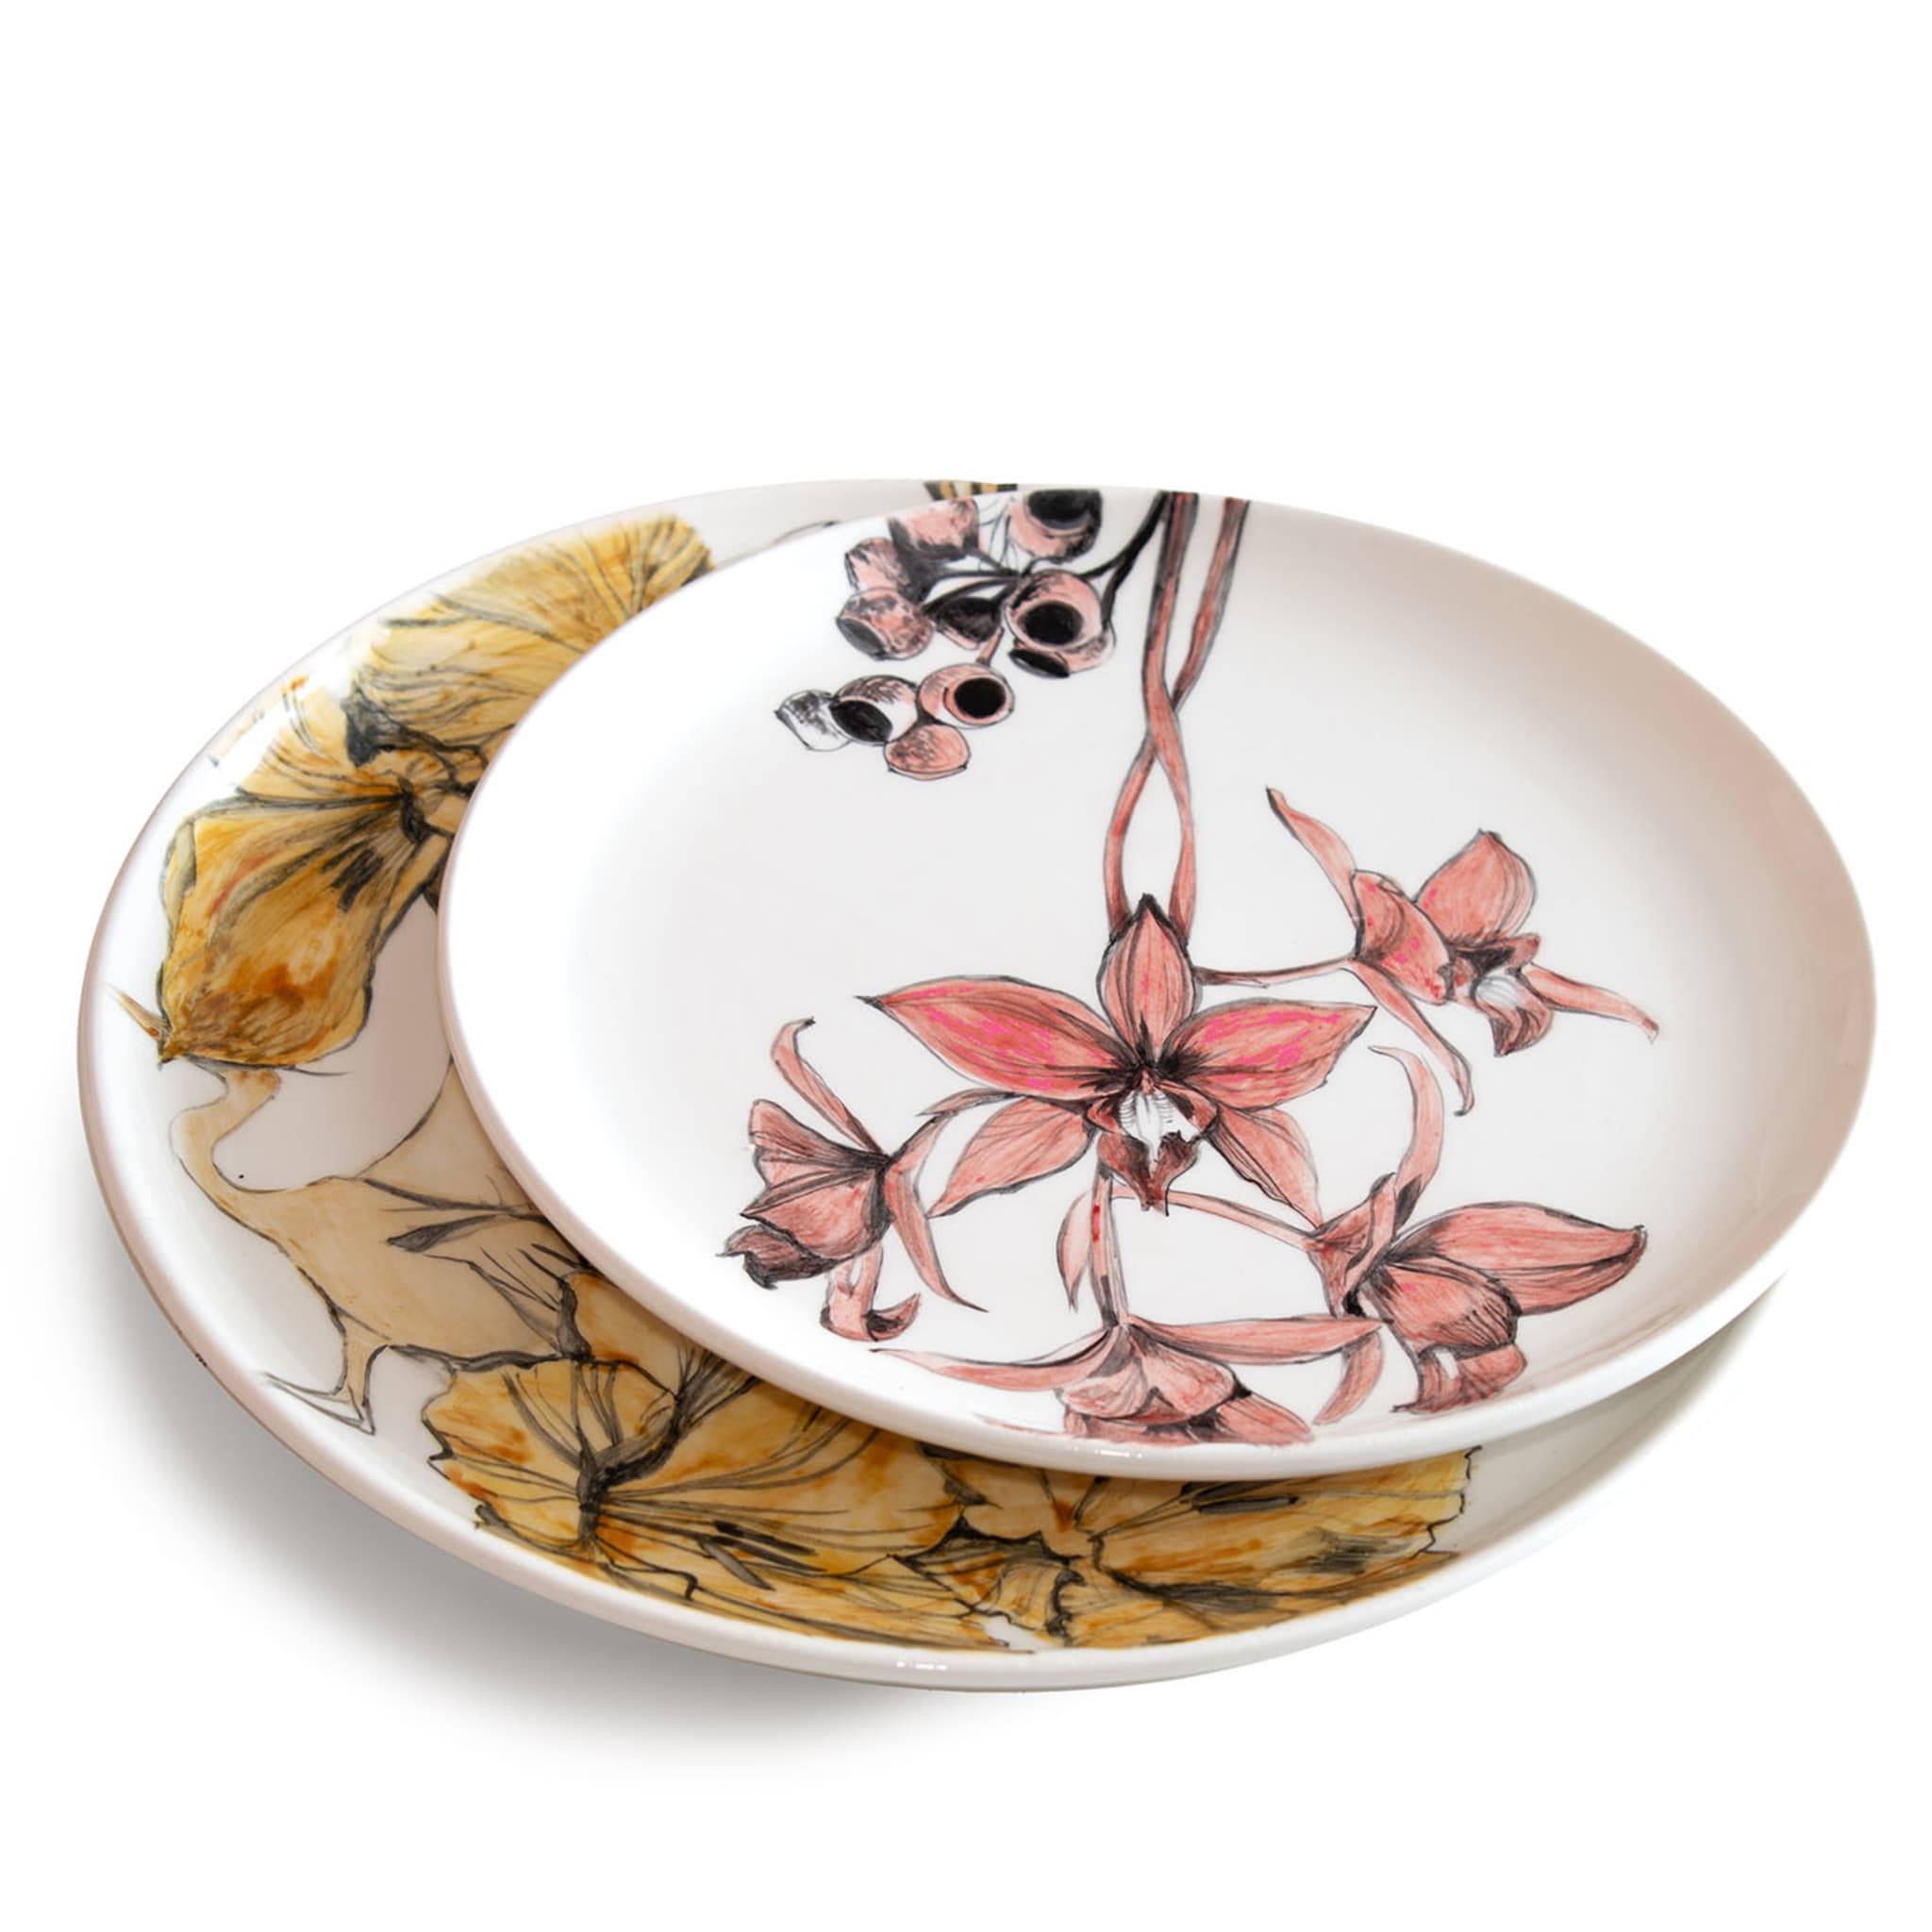 Ethereal Blossom Dinner Plate - Alternative view 2